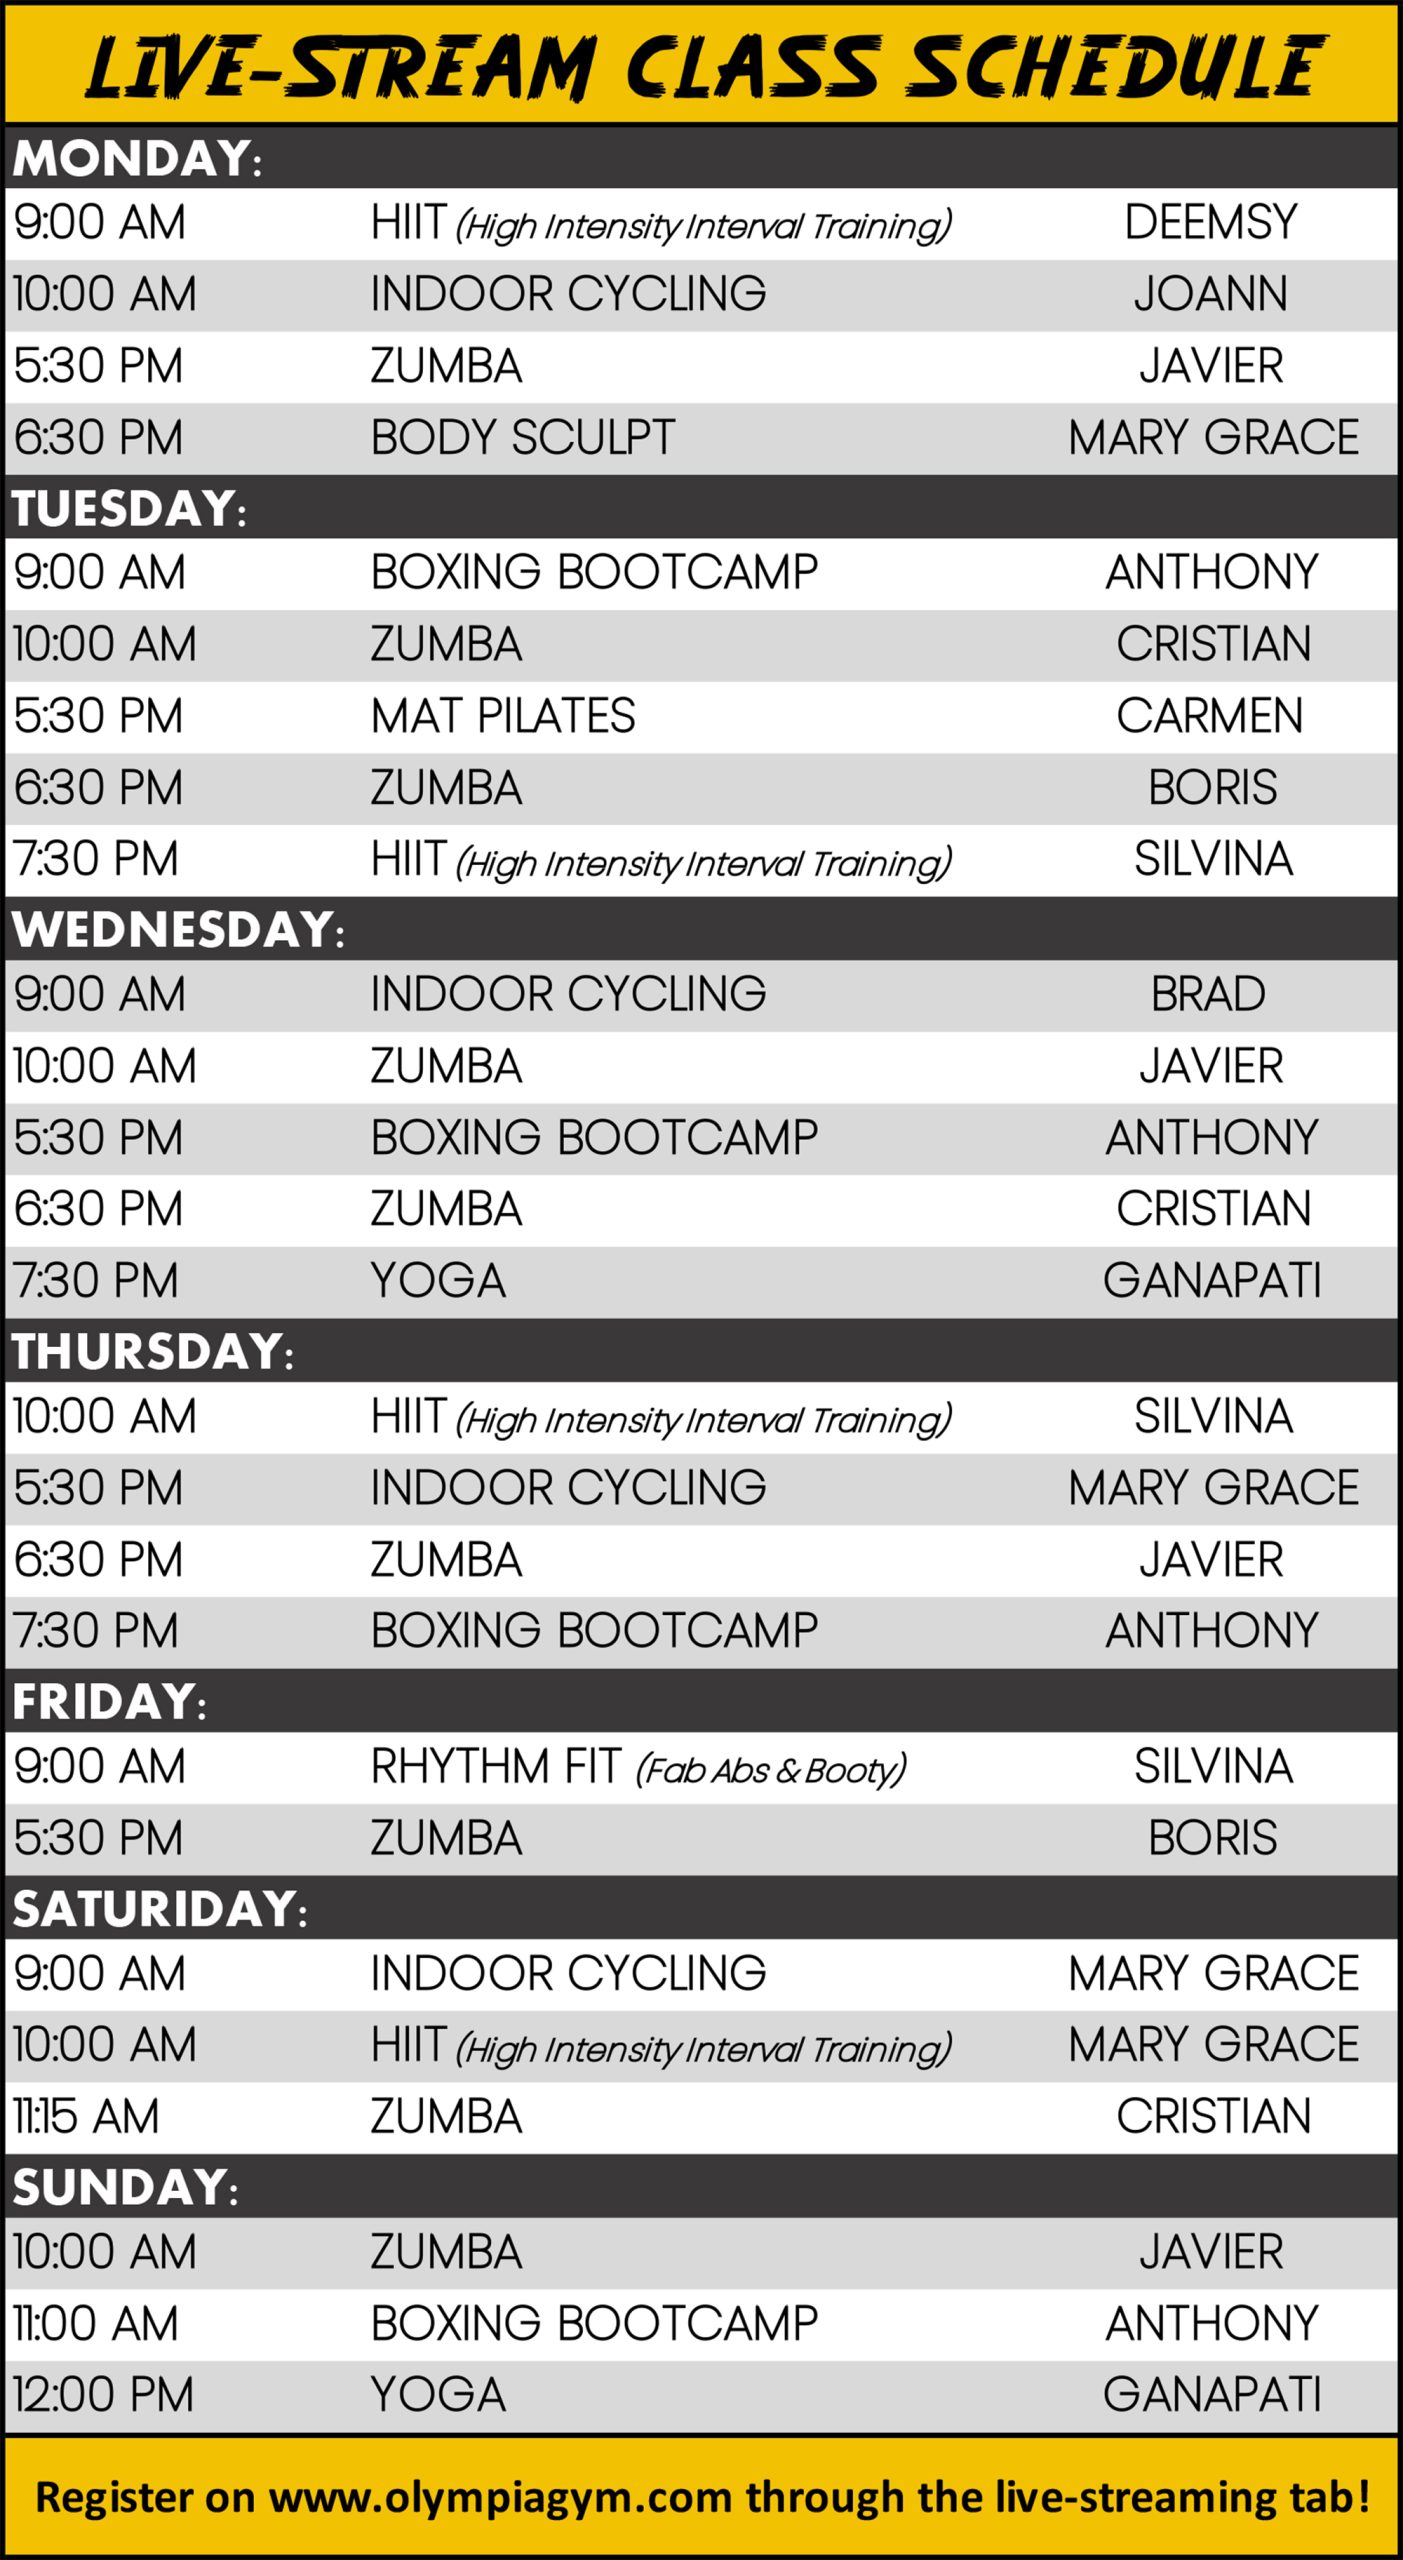 Live-Stream Class Schedule at Olympia Gym